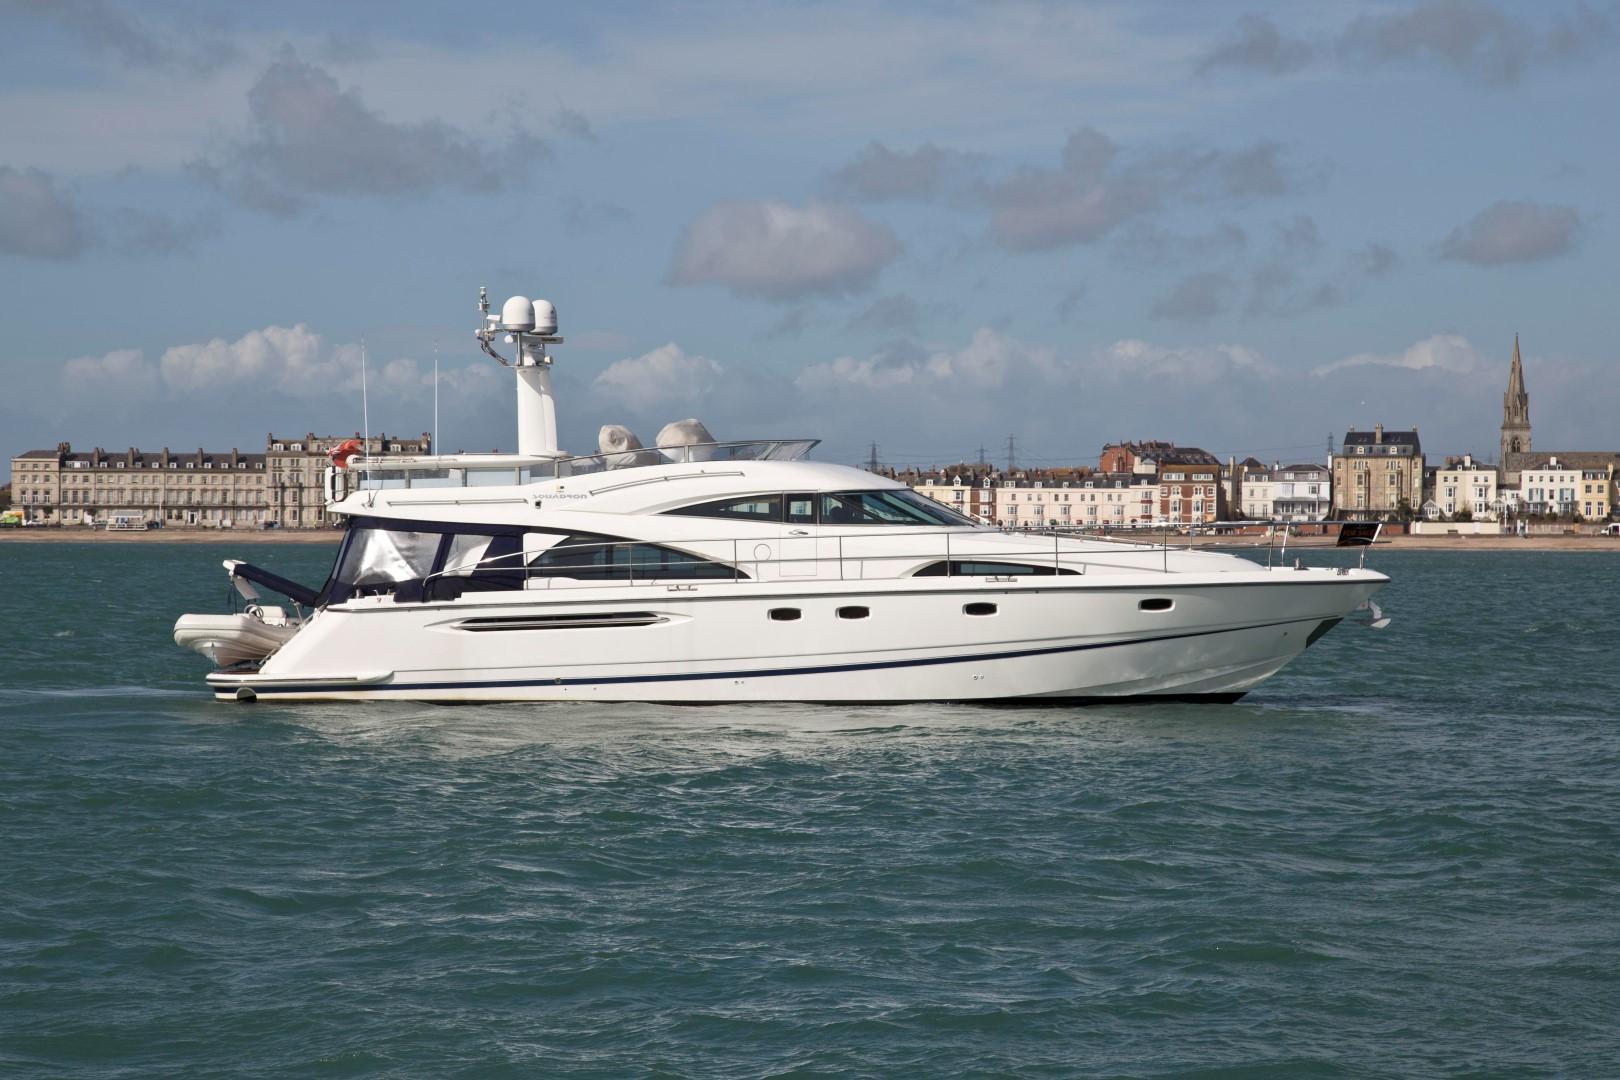 Fairline Squadron 58, Weymouth